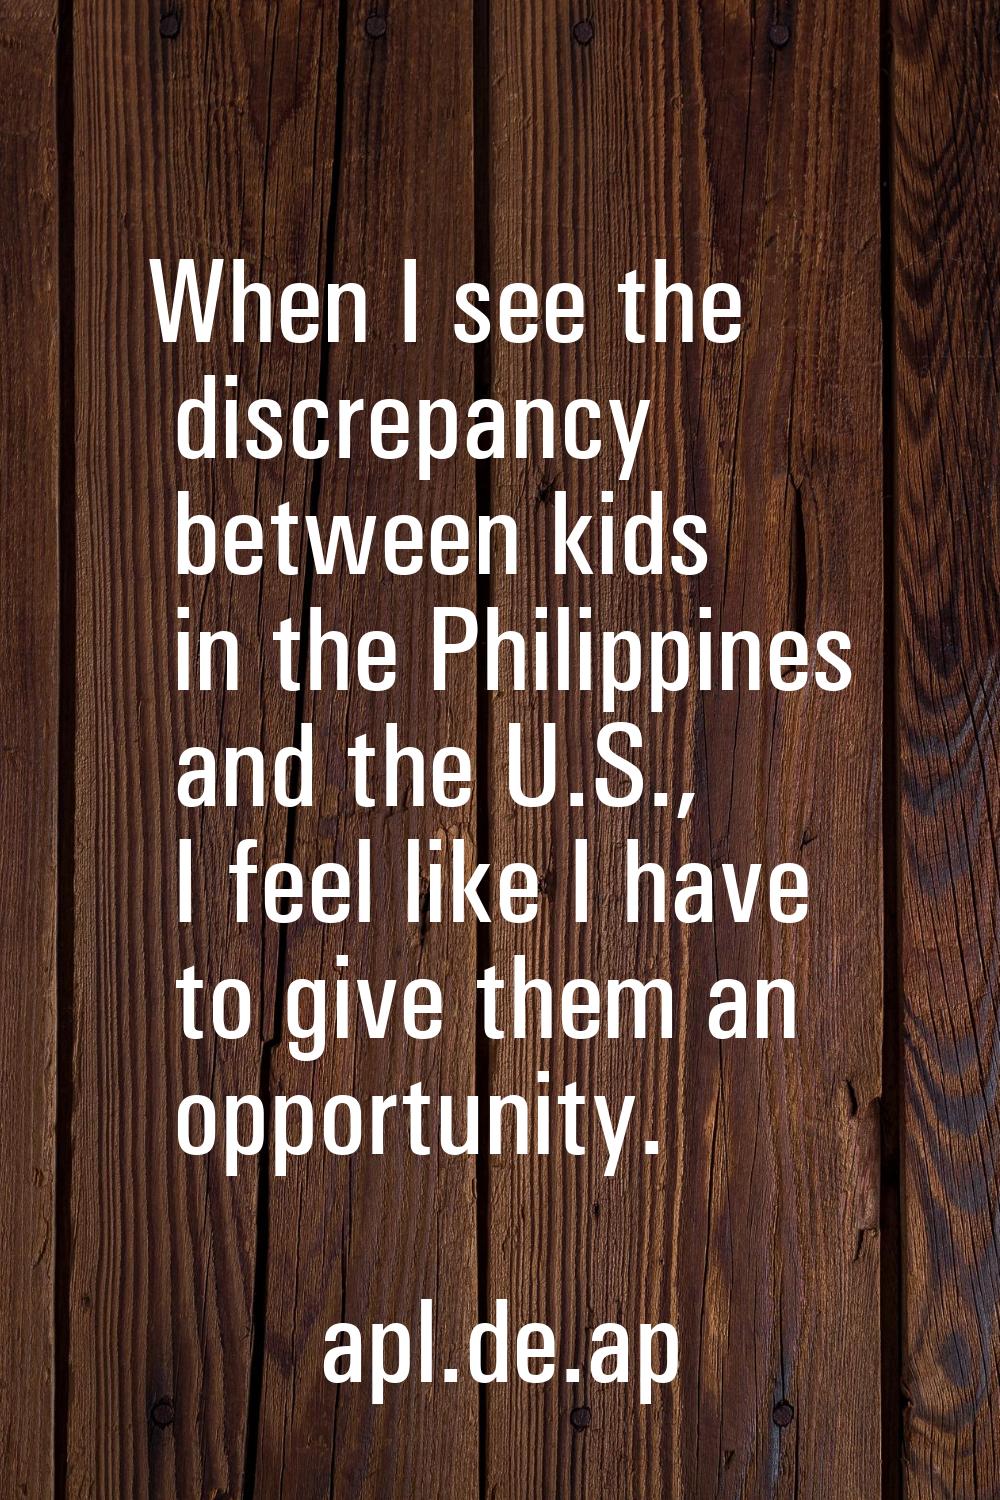 When I see the discrepancy between kids in the Philippines and the U.S., I feel like I have to give